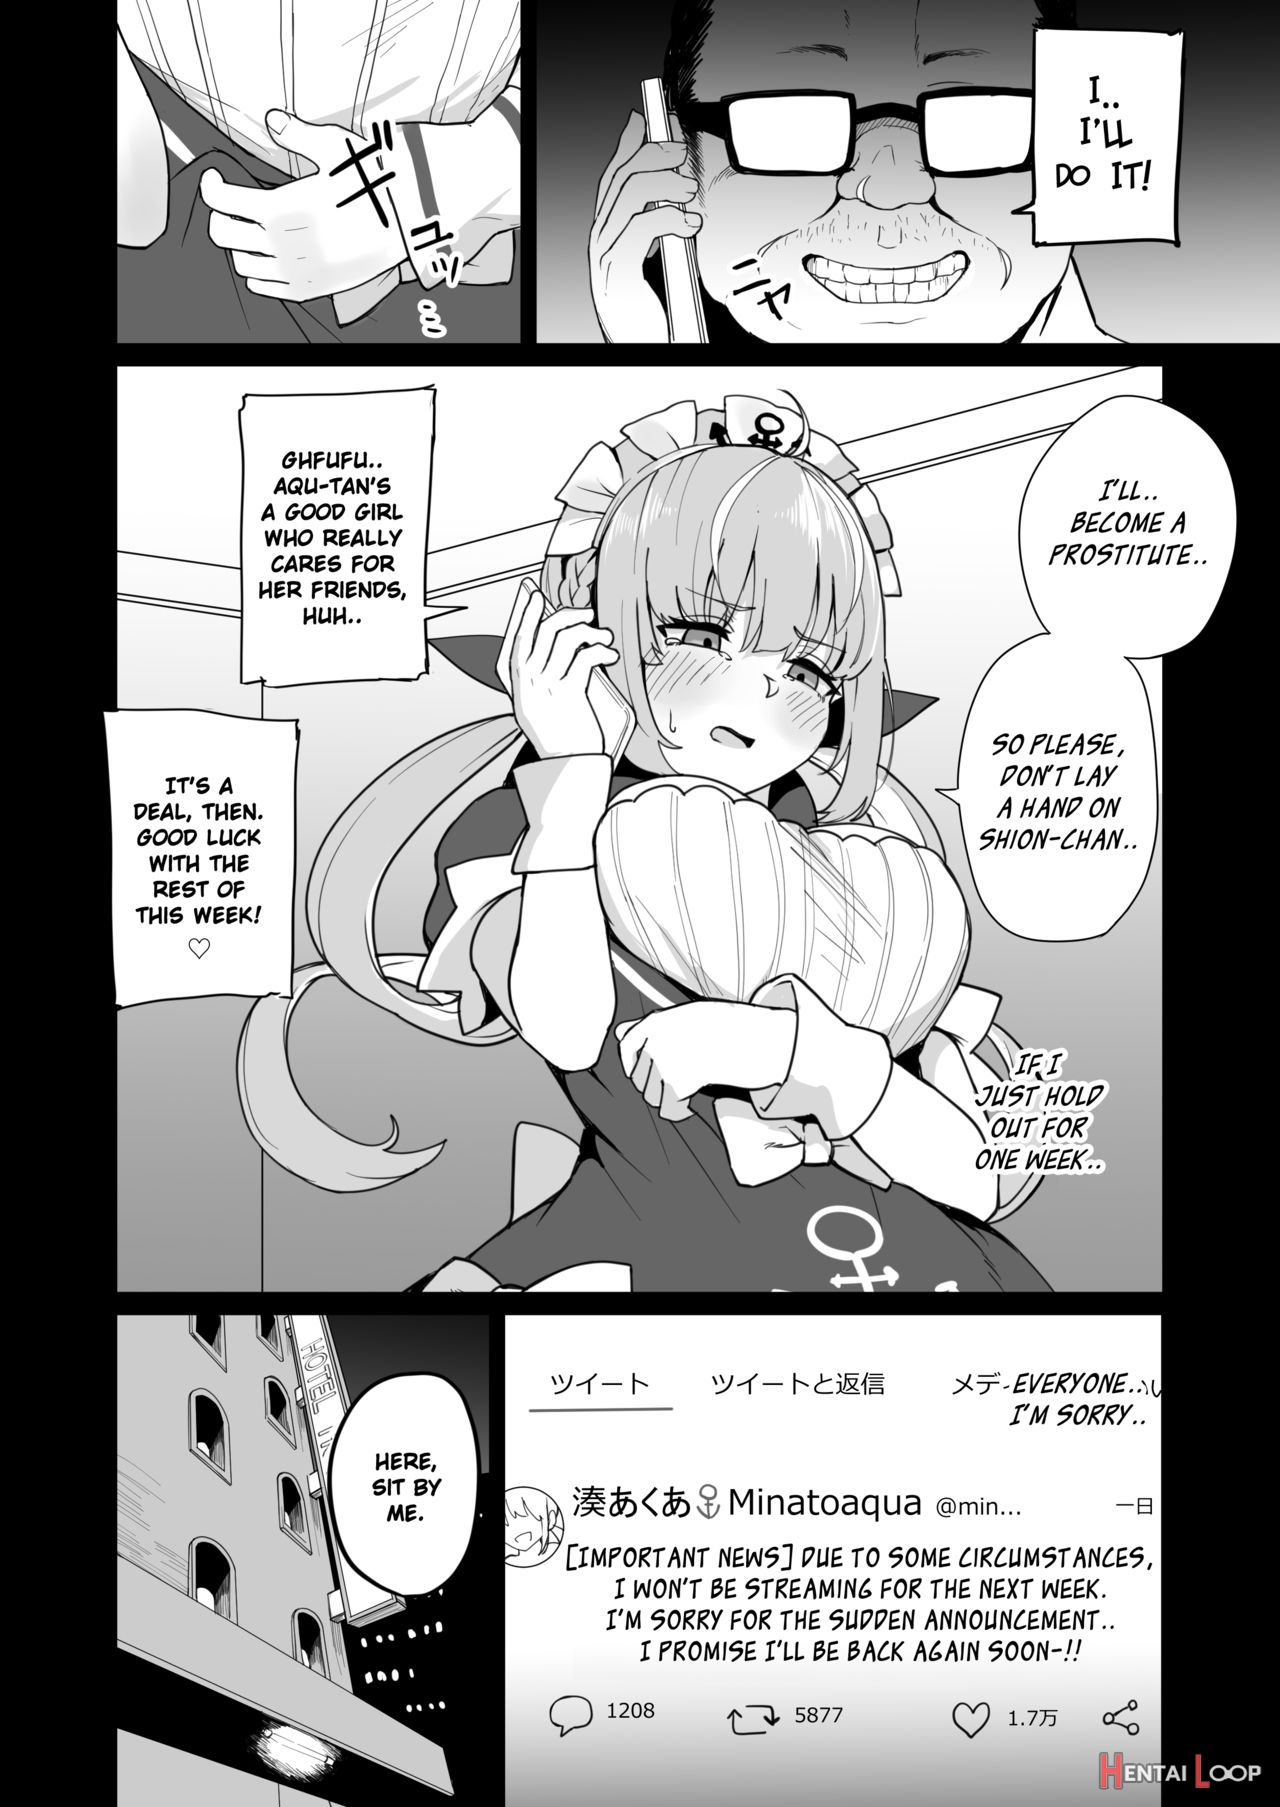 Aqua-chan, For Her Friend's Sake page 7